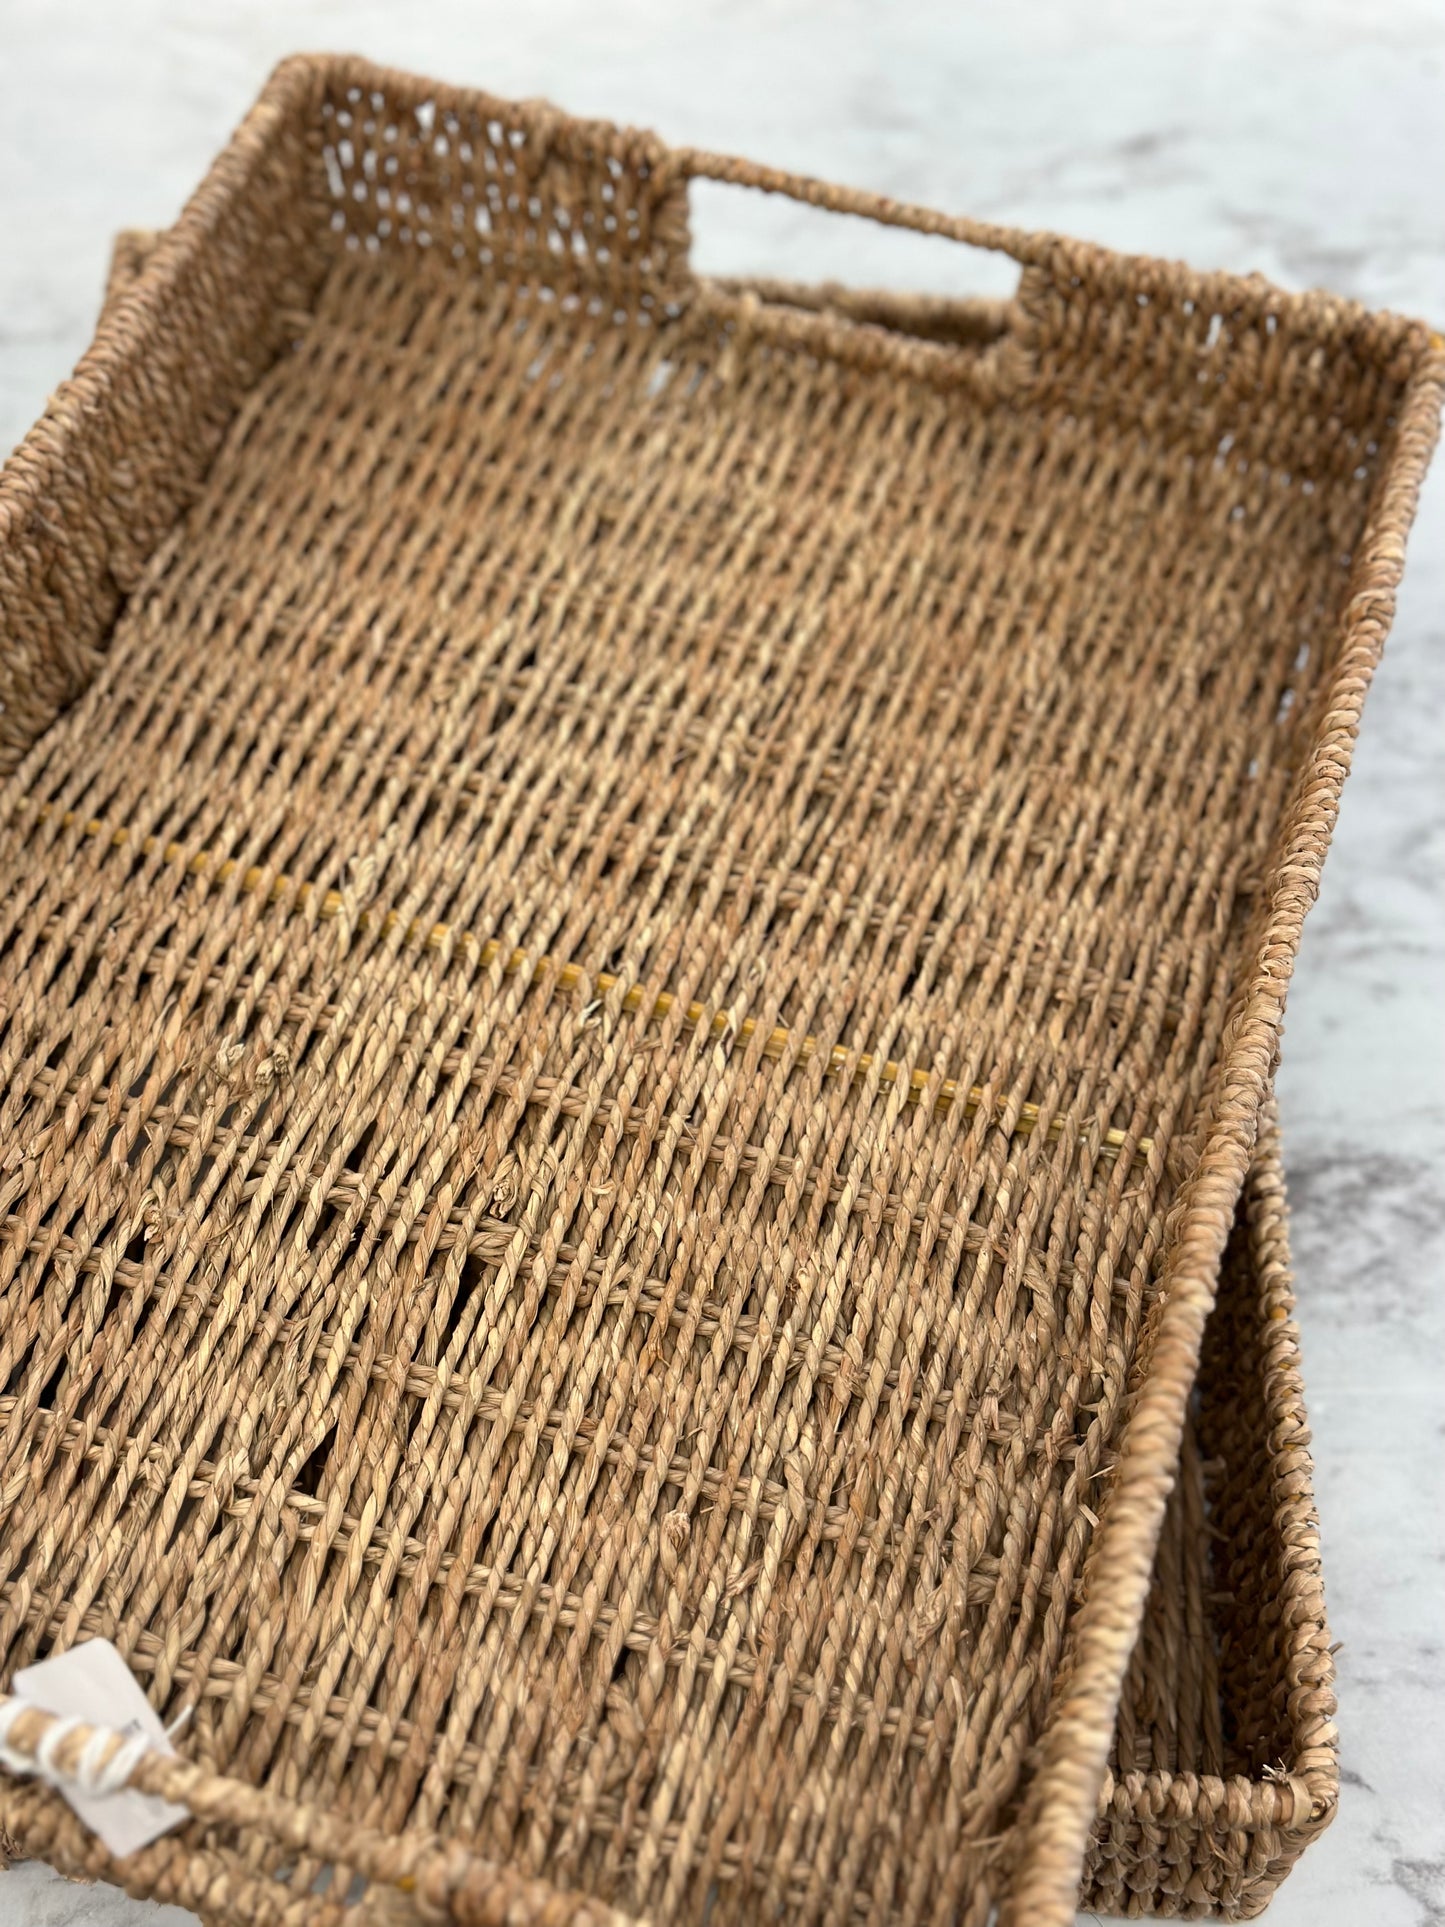 Wicker square tray with handles